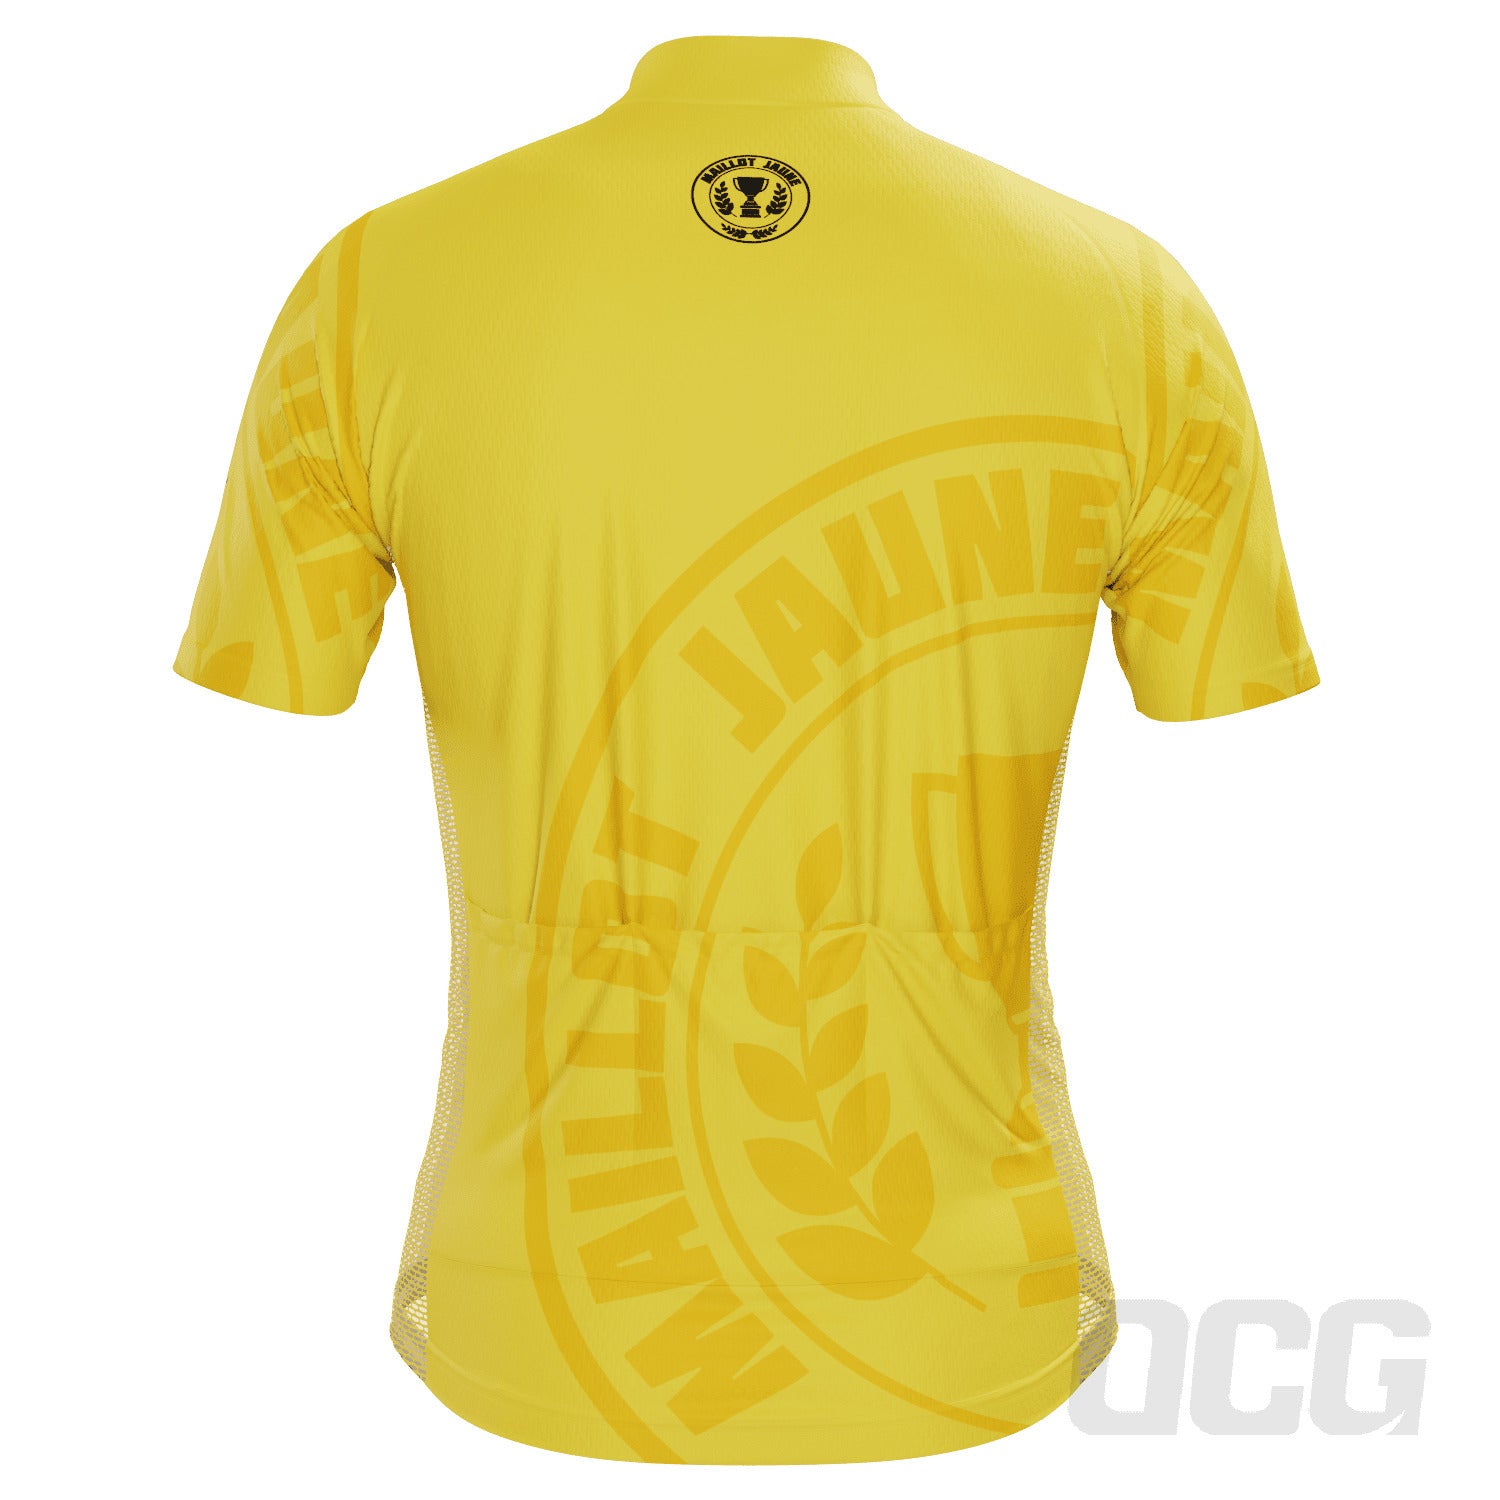 Men's Yellow Leaders Maillot Jaune Short Sleeve Cycling Jersey